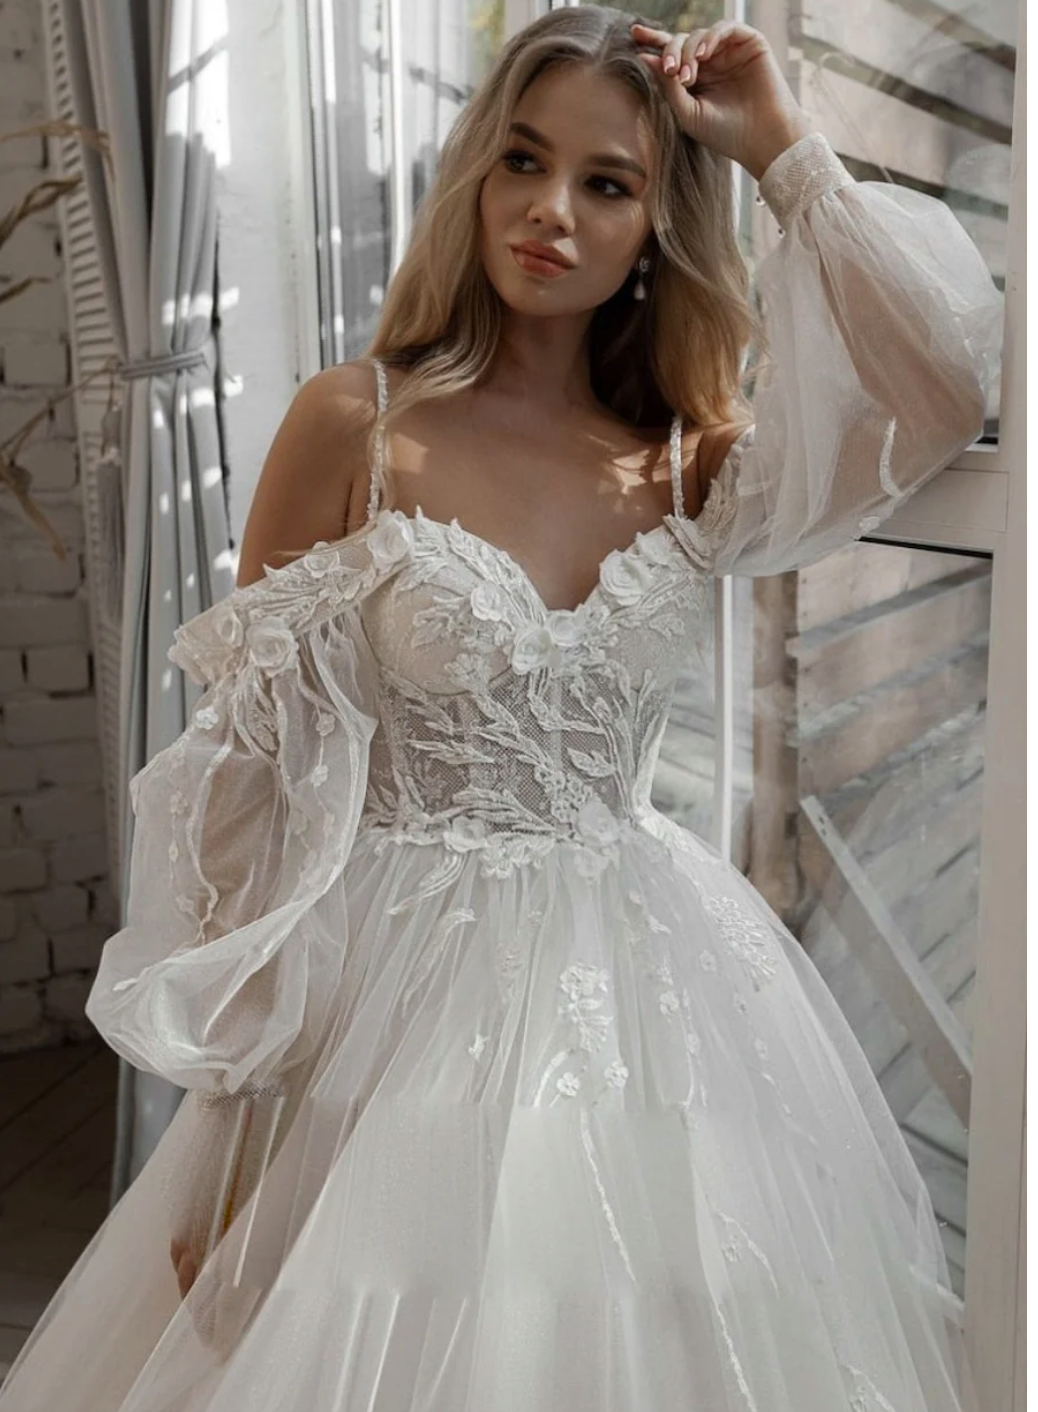 19 Magical Wedding Gowns For the Winter Fairy Tale Bride! | Fairytale  wedding gown, Contemporary wedding dress, Wedding gowns